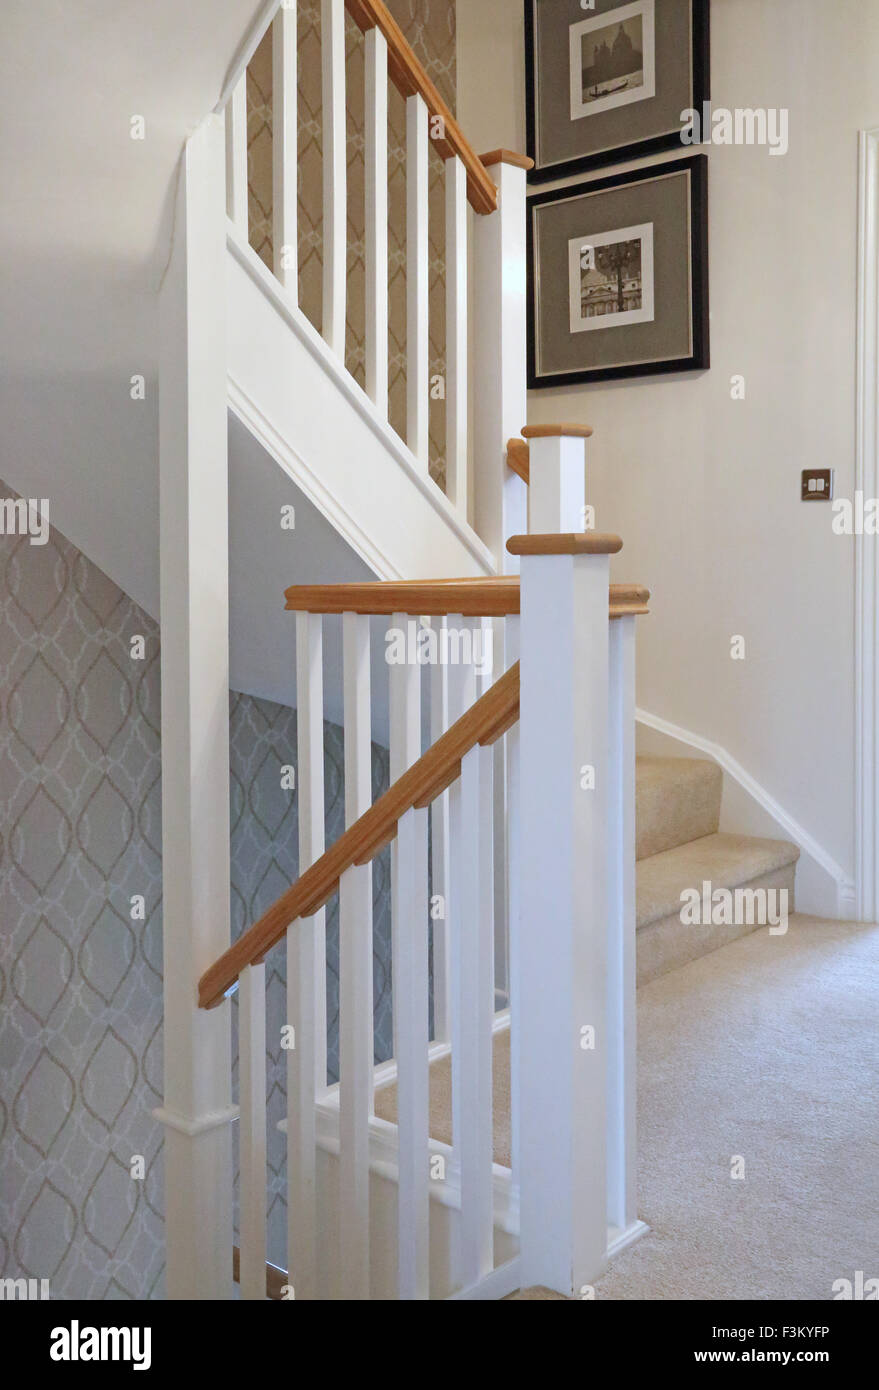 new stair banister  28 images  new stair banisters 28 